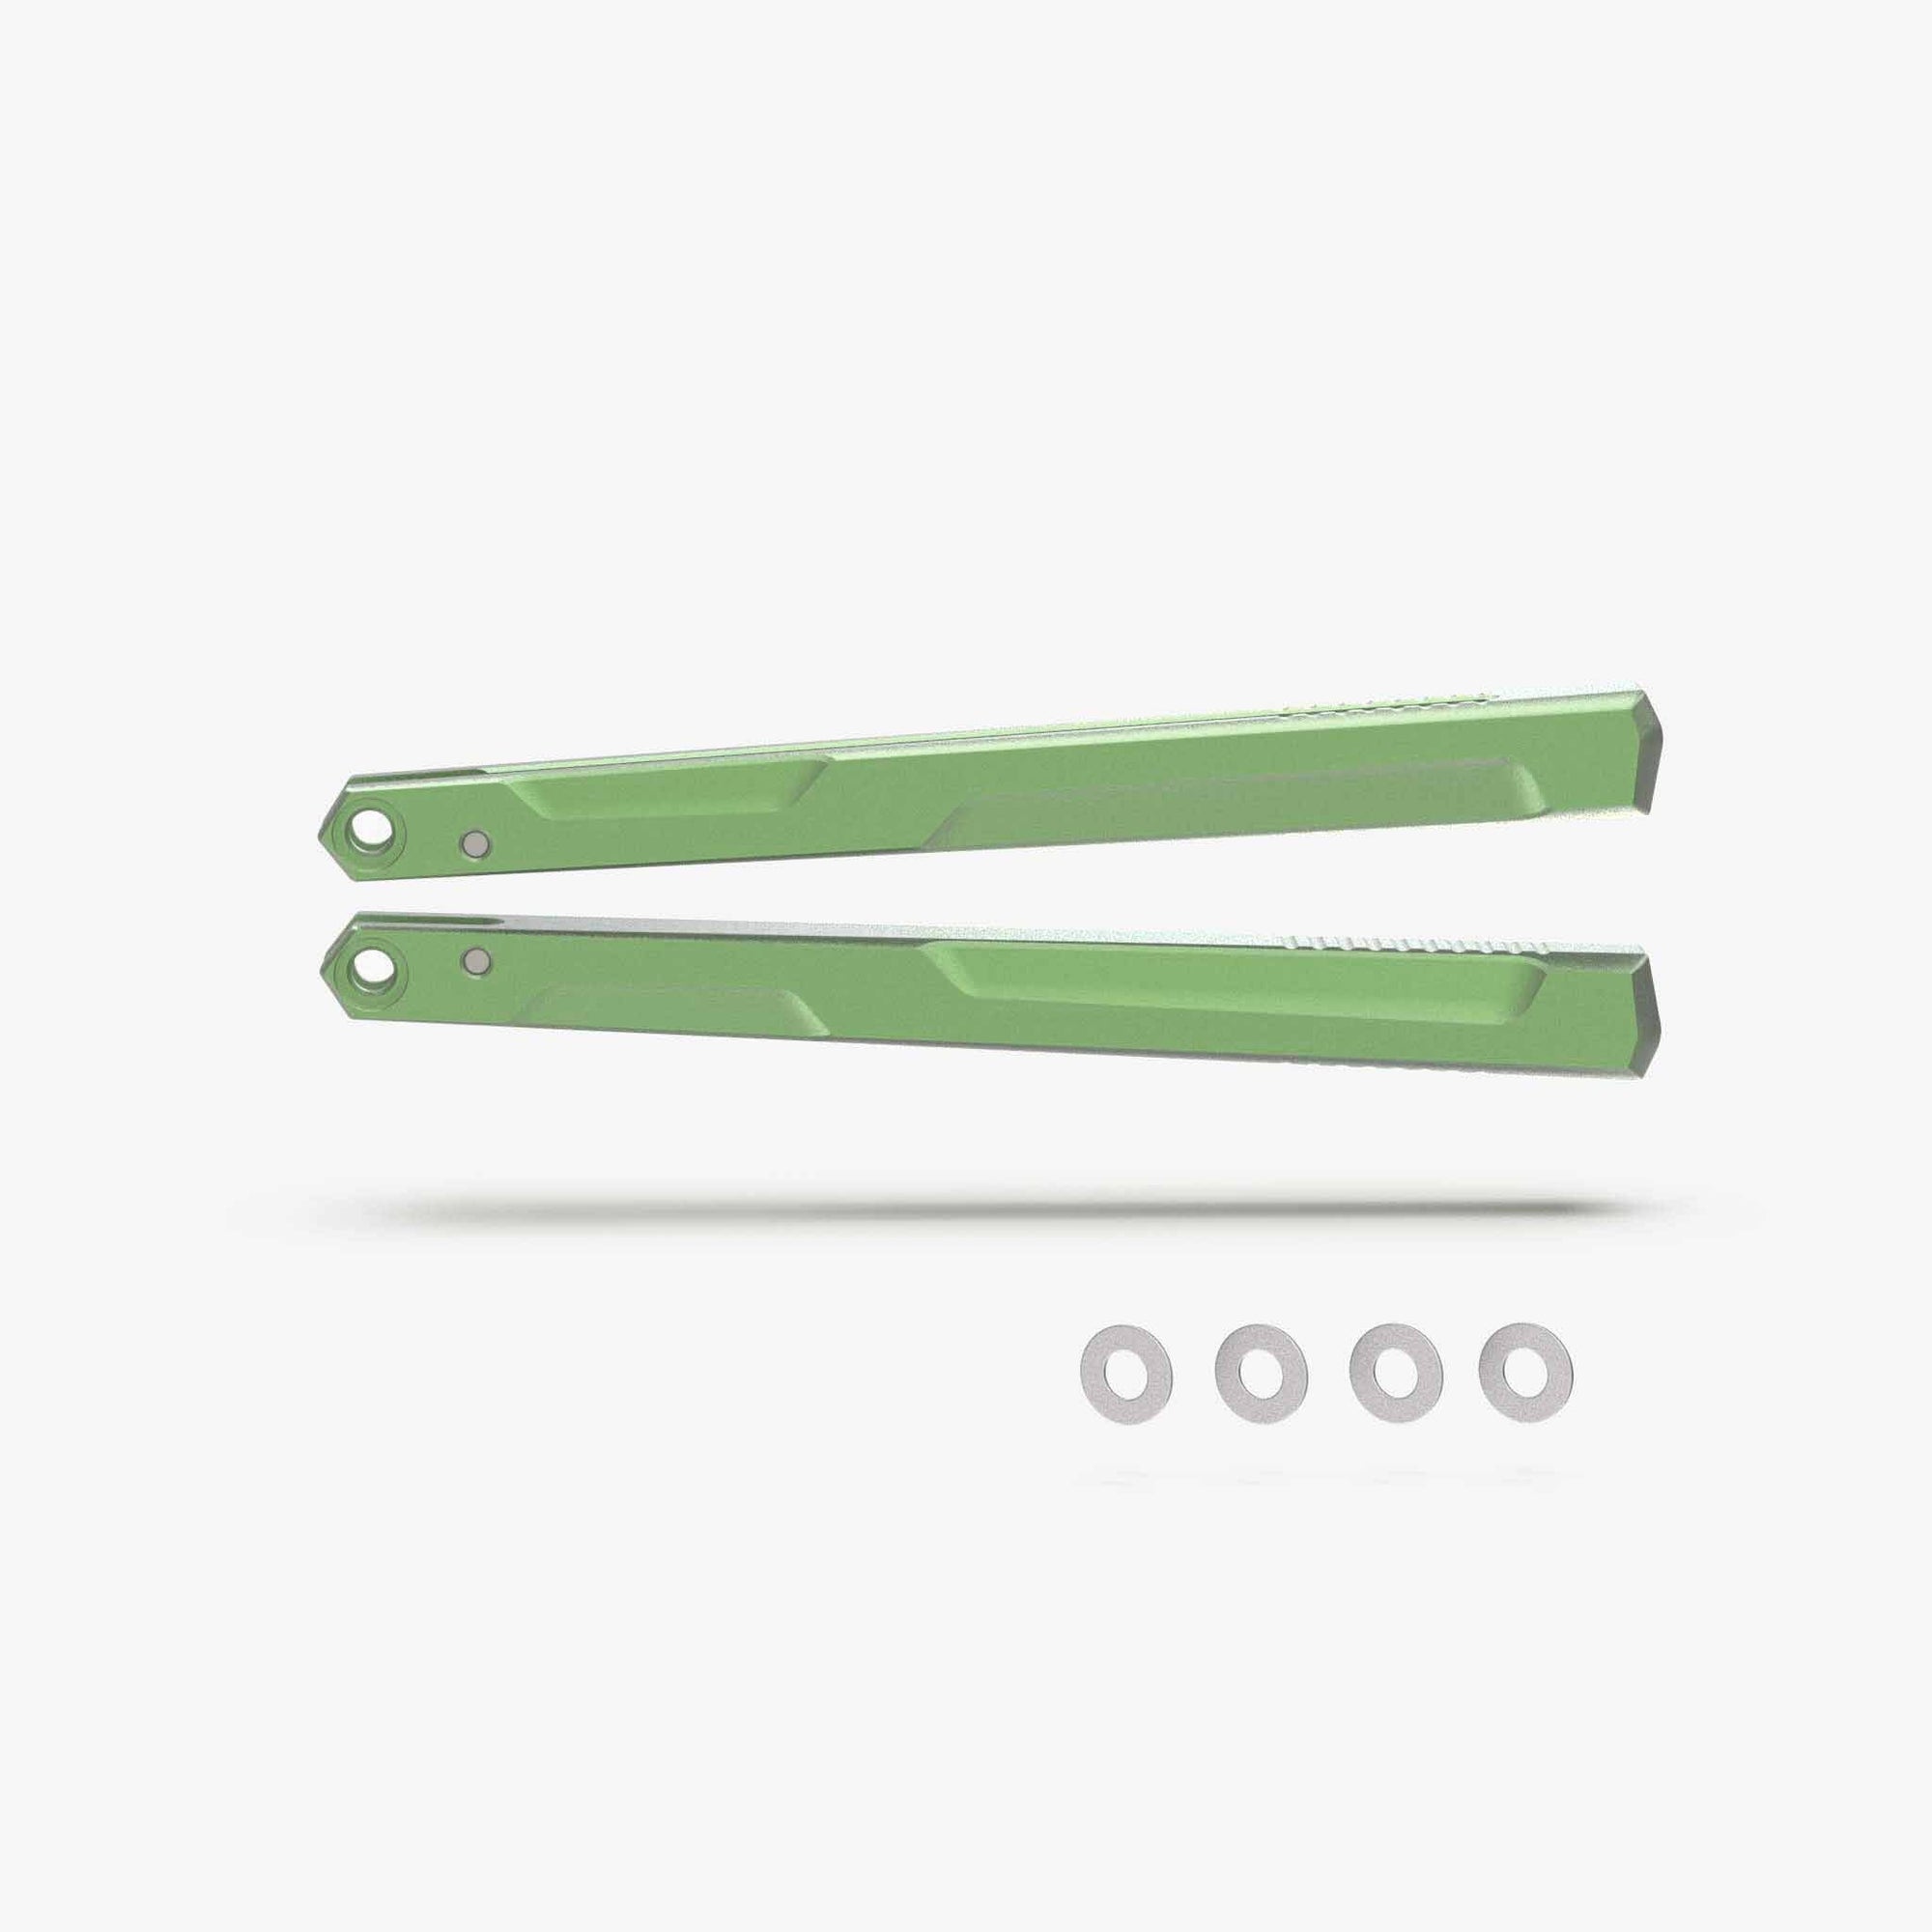 Aluminum v1.5 Handles for the Kershaw Lucha Balisong-Spring Green